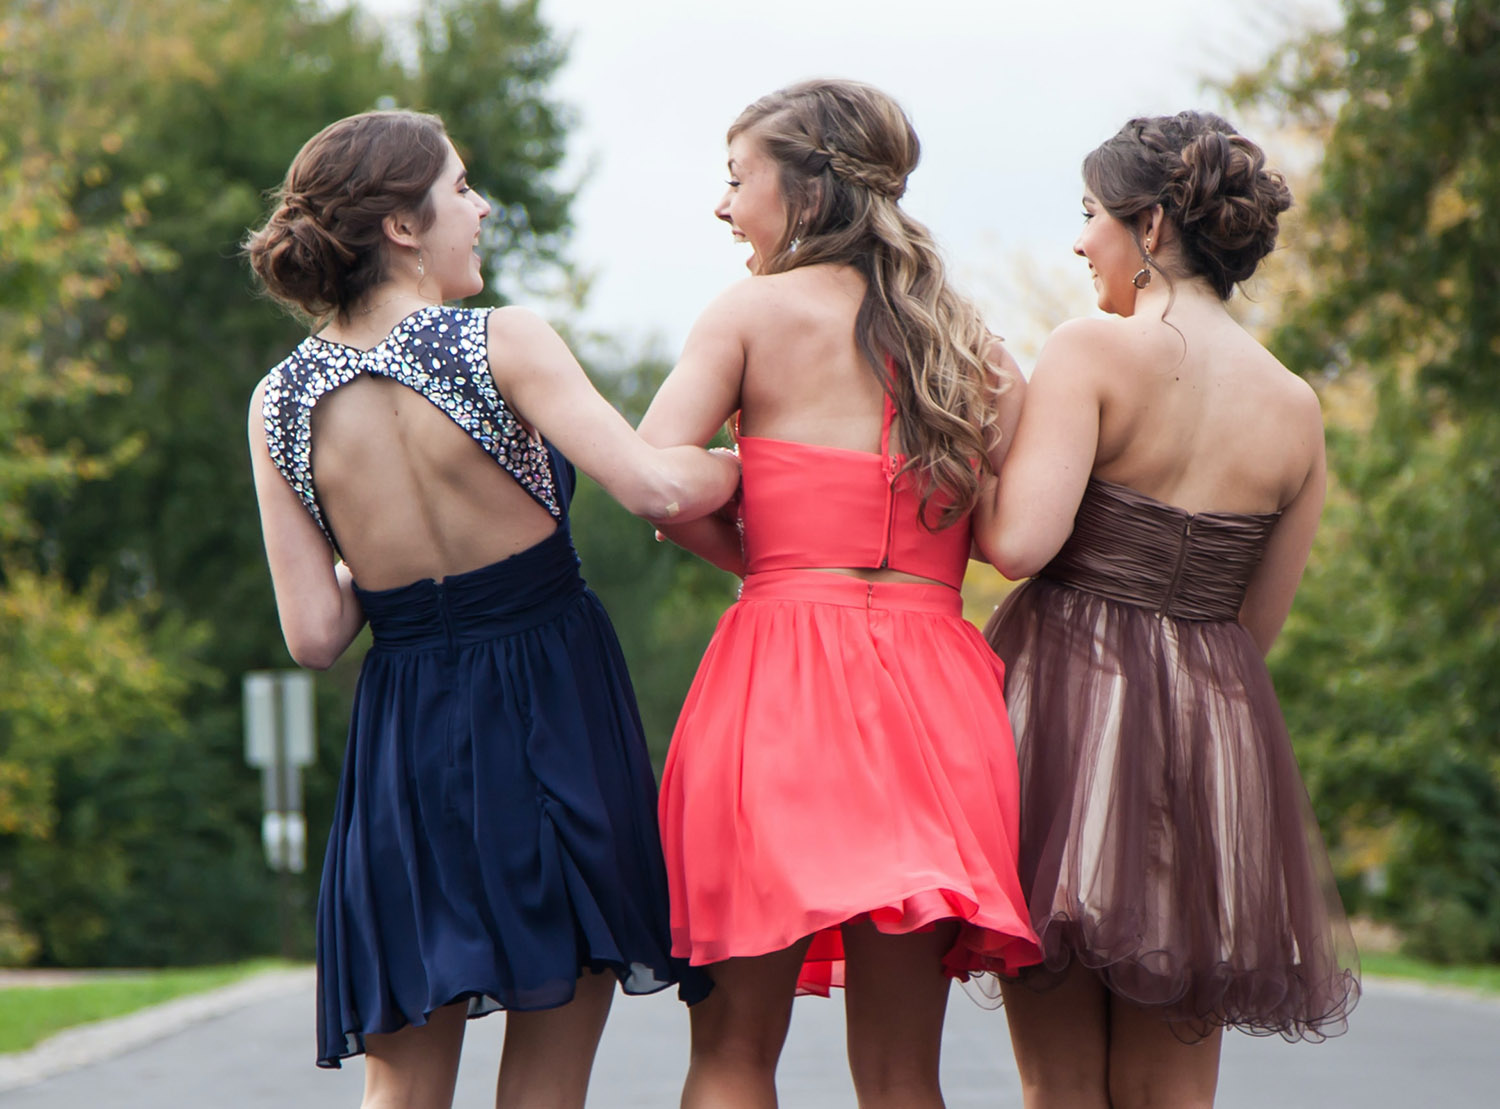 Friends locking arms laughing in prom dresses